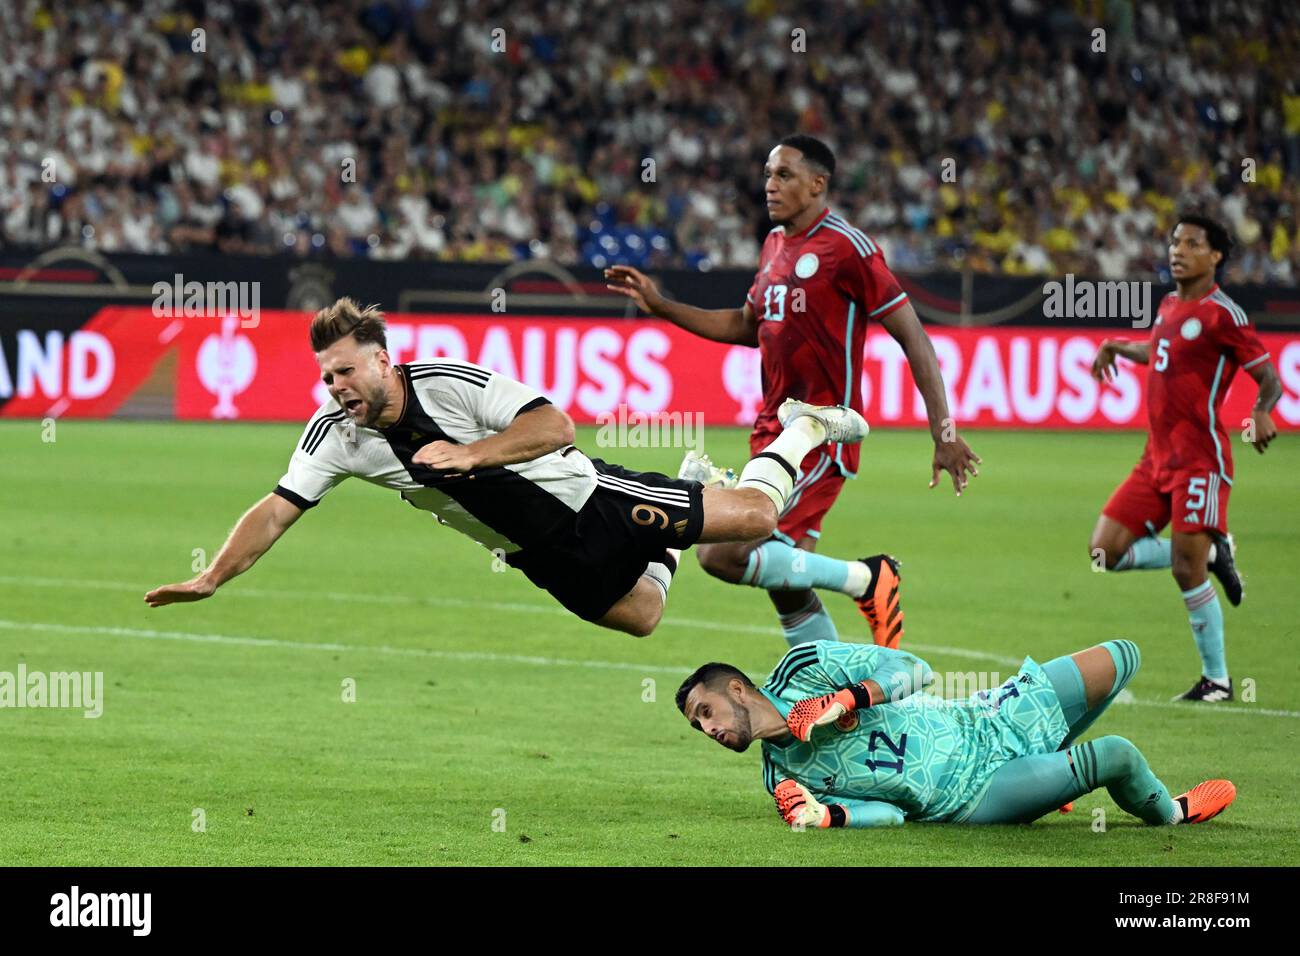 Gelsenkirchen, Germany. 20th June, 2023. Soccer: International match, Germany - Colombia, at the Veltins Arena. Germany's Niclas Füllkrug (l) and Colombia's goalkeeper Camilo Vargas fight for the ball. Credit: Federico Gambarini/dpa/Alamy Live News Stock Photo